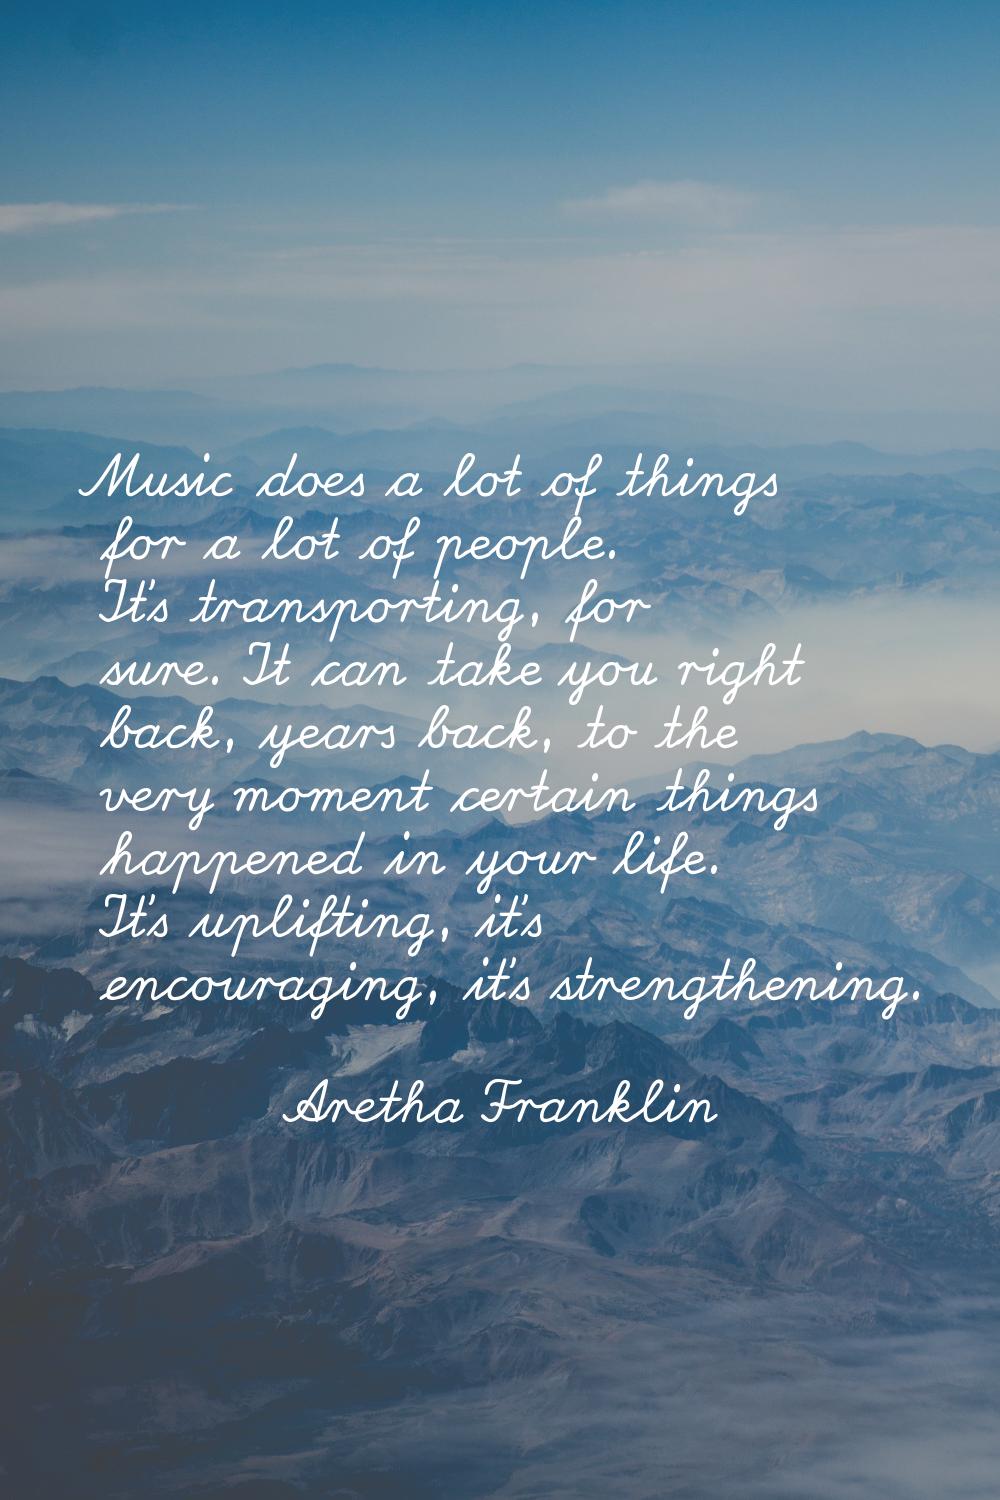 Music does a lot of things for a lot of people. It's transporting, for sure. It can take you right 